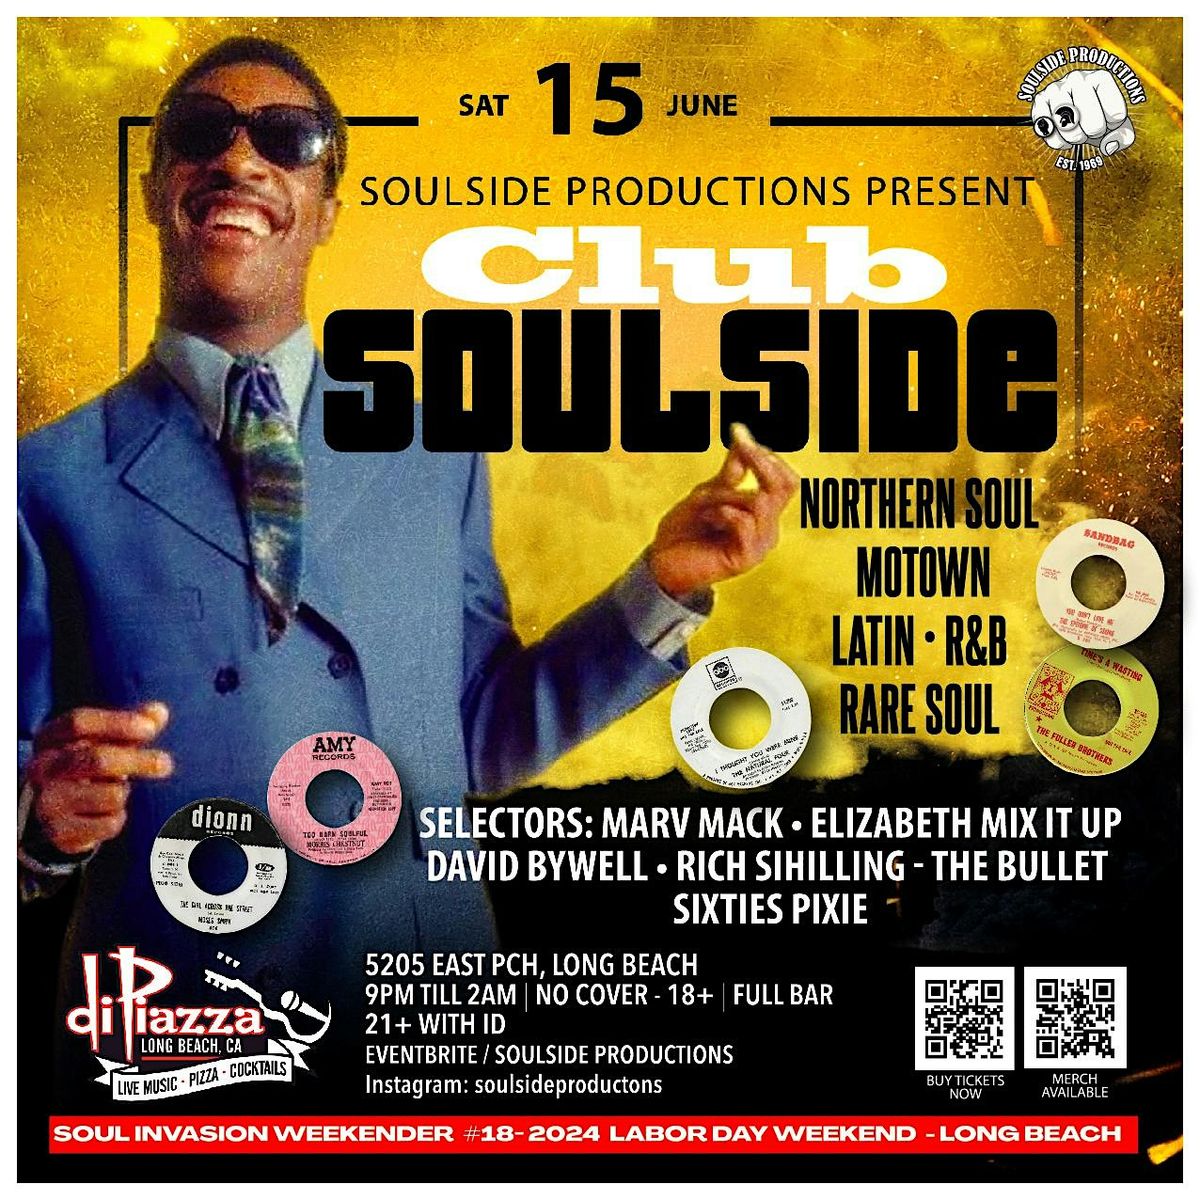 CLUB SOULSIDE ( NO COVER ) SO' CAL DANCE PARTY